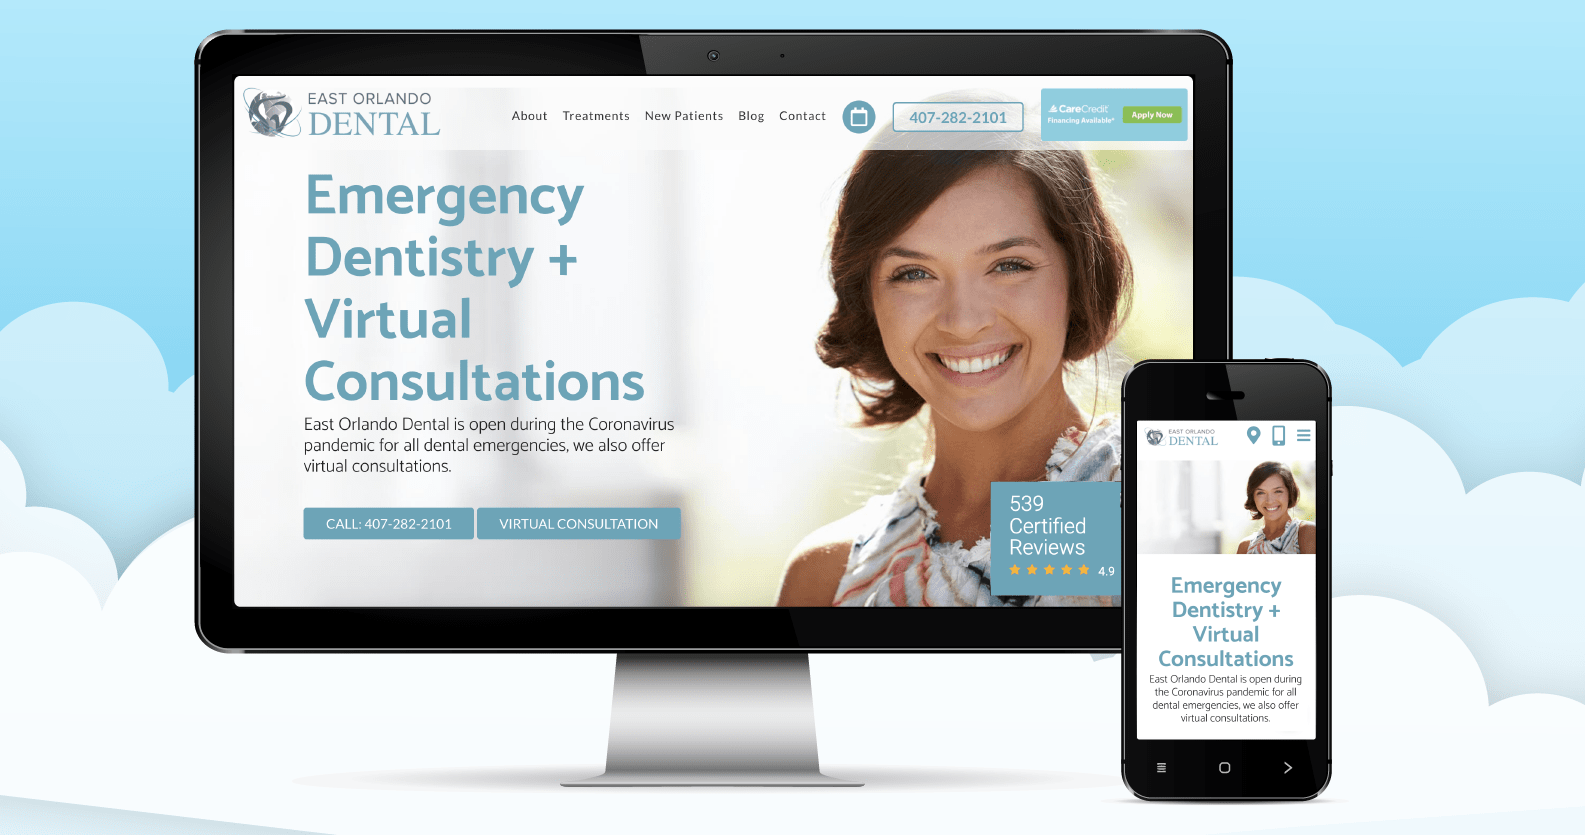 A dental website's homepage highlighting emergency dentistry and virtual consultations